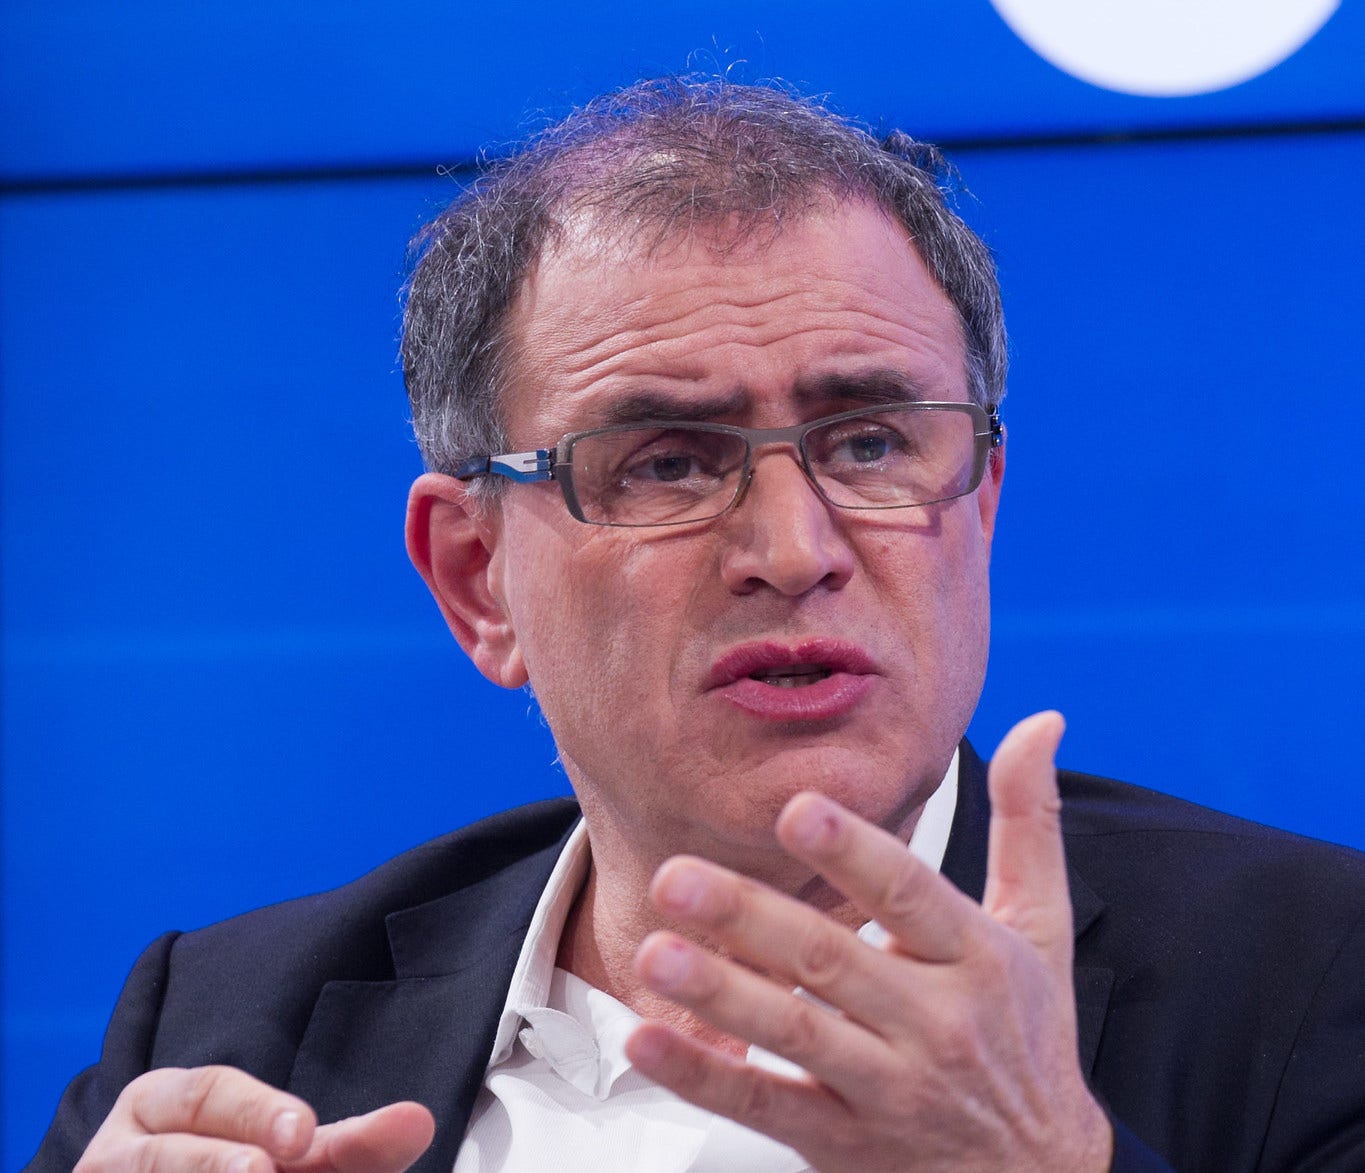 Binance, CZ Have 'Blood Money On Their Hands,' Says Nouriel Roubini: 'Negative Energy Is To Allow $8B Laundering' By Iran